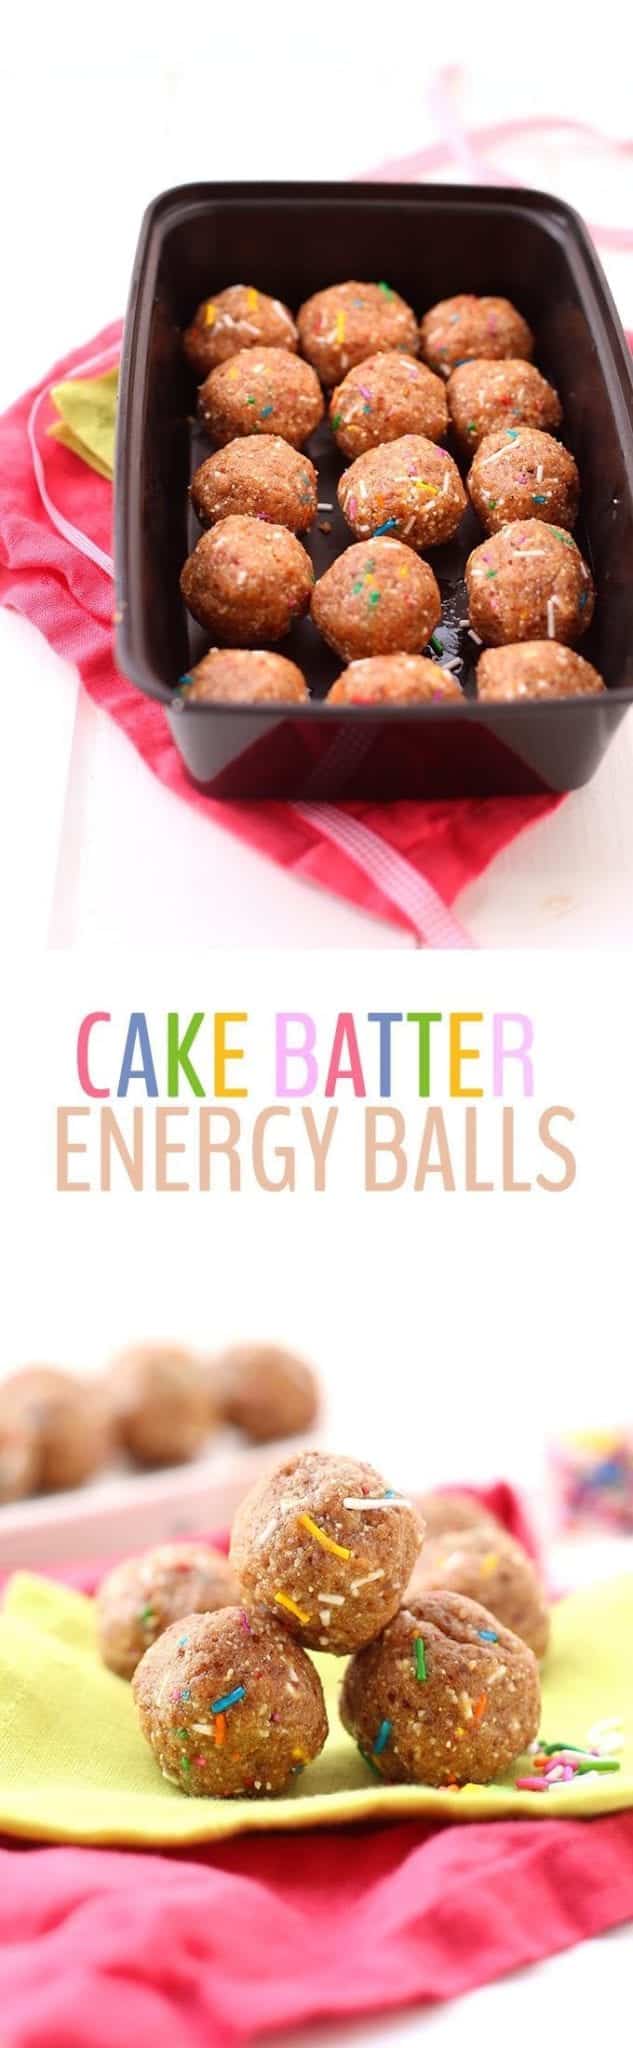 Want the taste of cake batter without having to whip up a whole cake? These Cake Batter Energy Balls are a lightened-up and high-protein snack recipe that tastes just like the real thing!